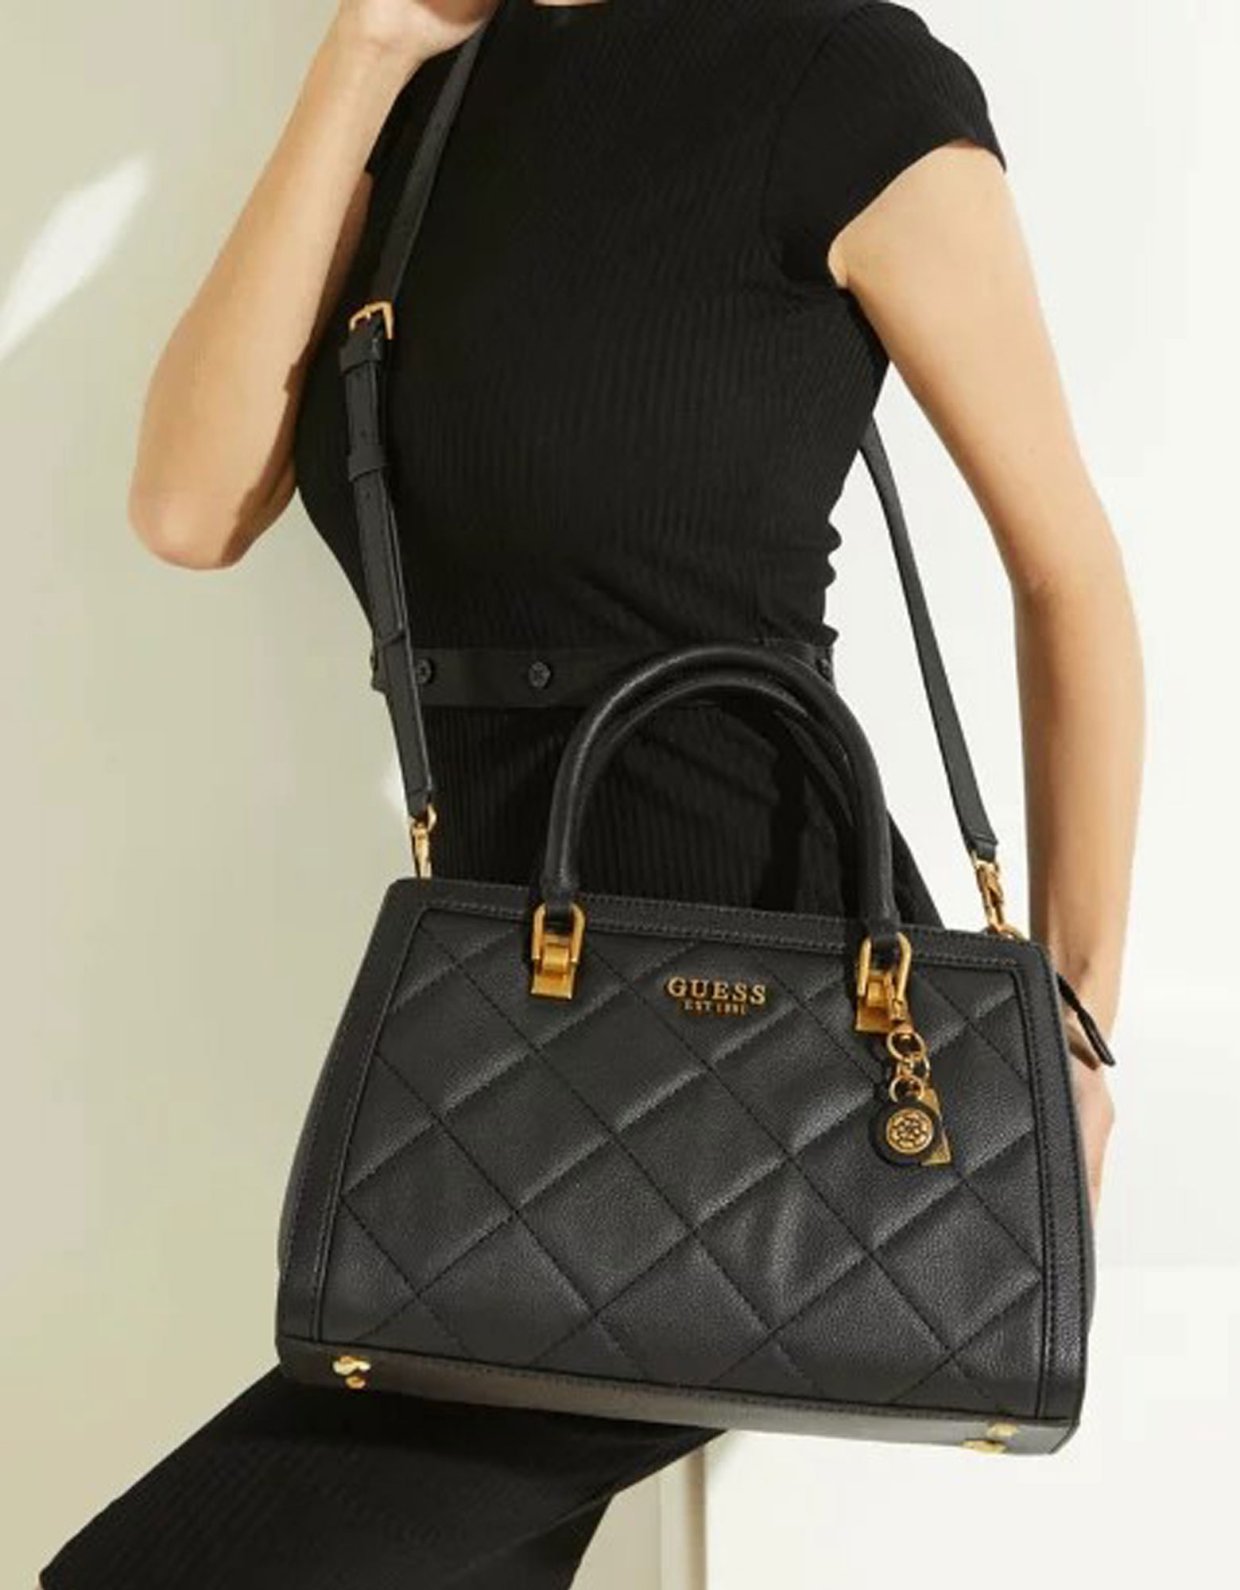 Guess Abey girlfriend satchel quilted bag black